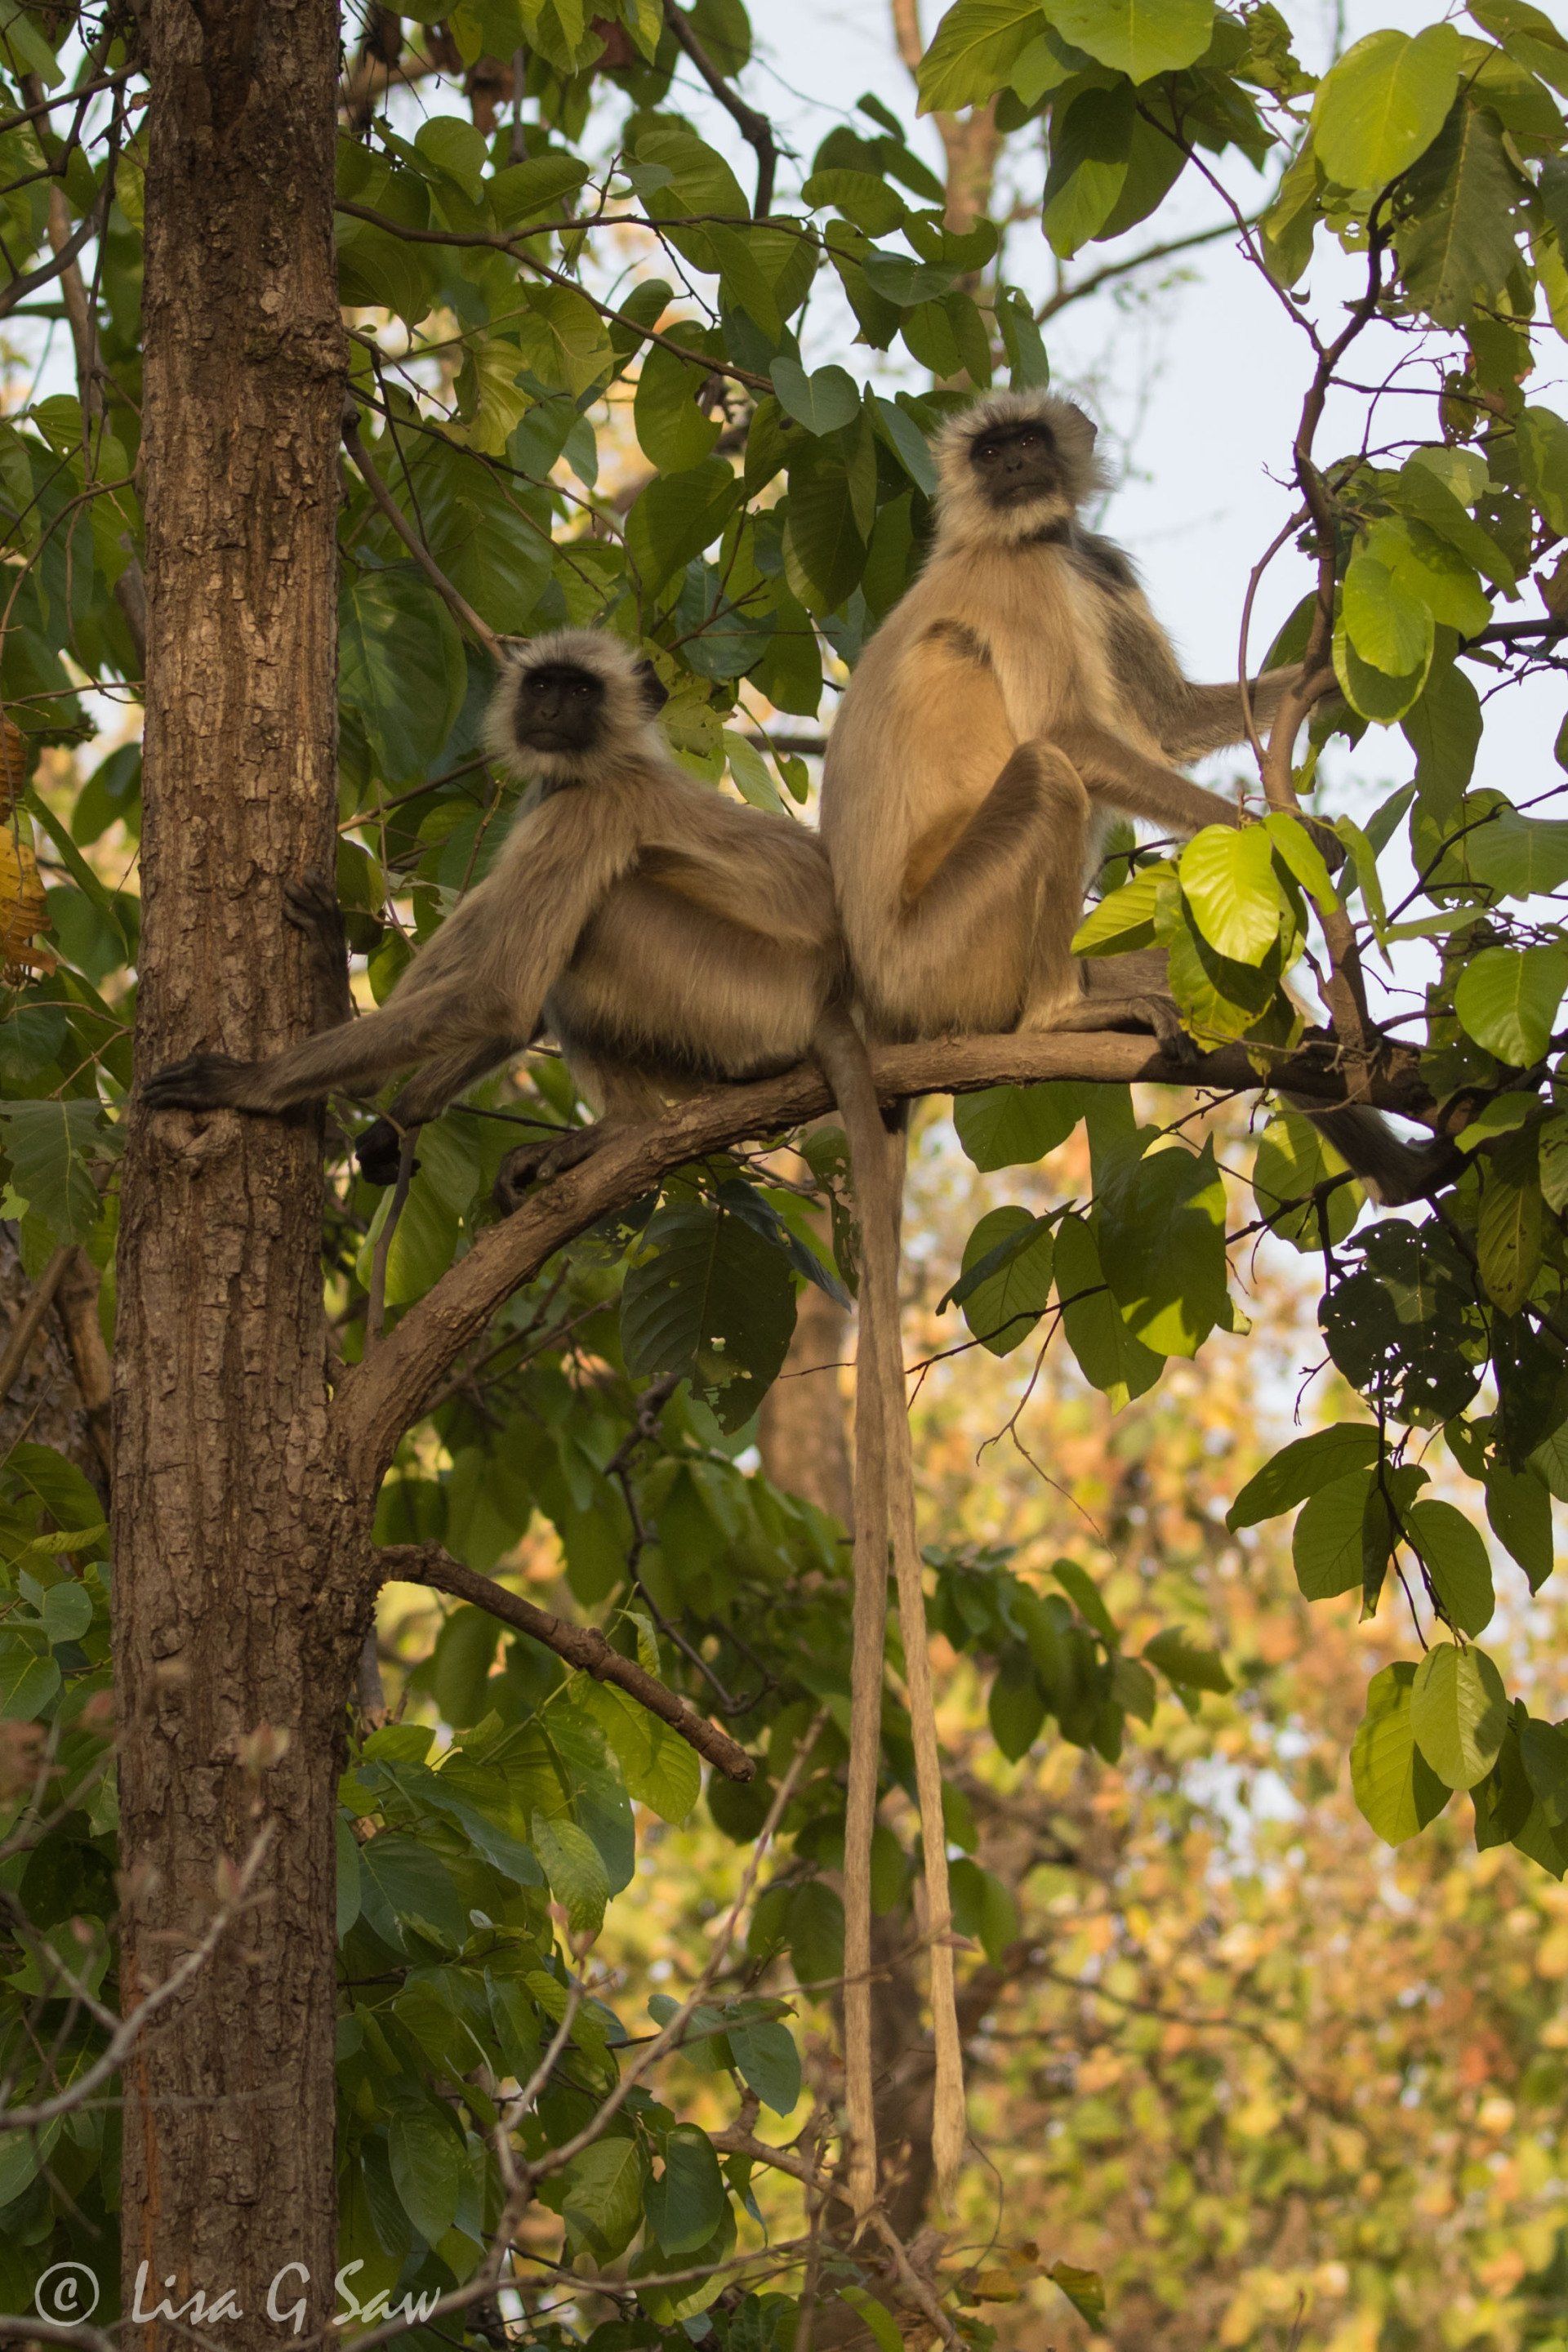 Two langurs with long tails sitting back to back up a tree